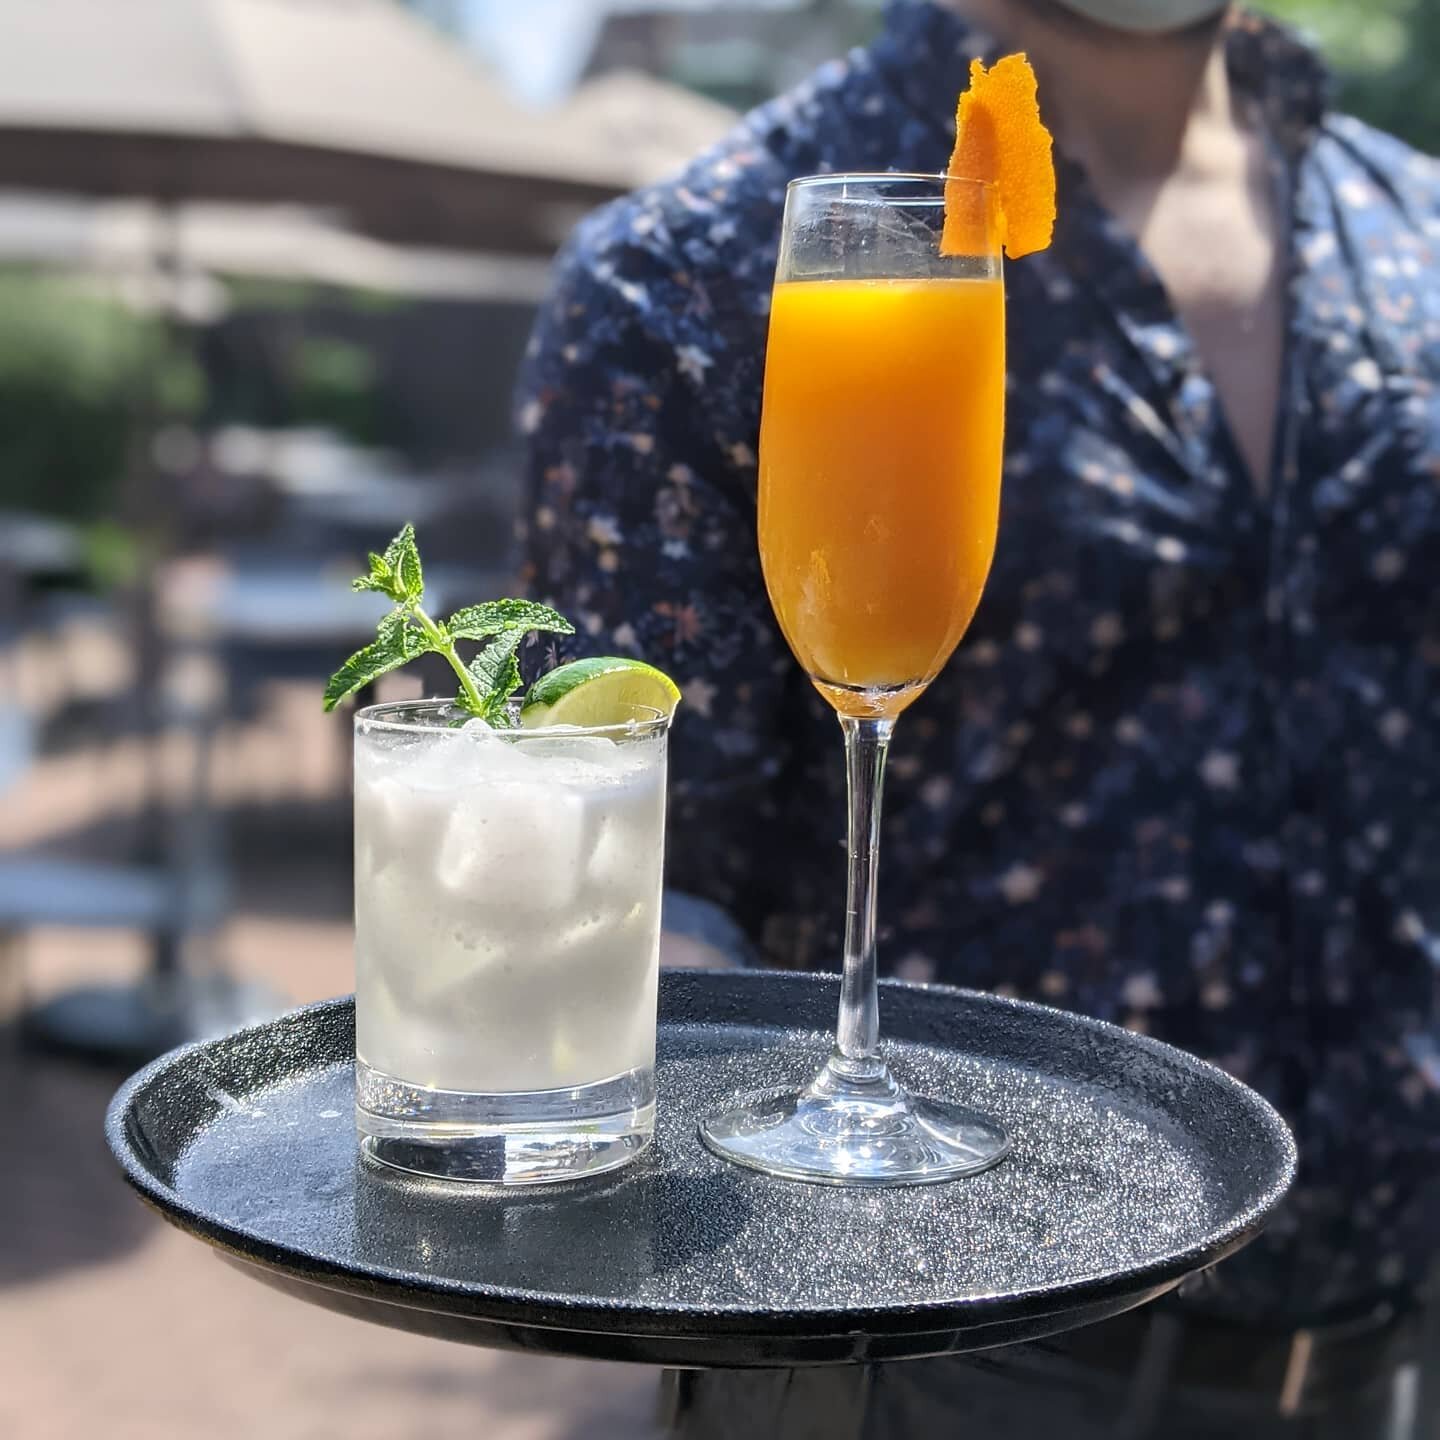 Stop by to enjoy this beautiful weekend! When you do, please wear your mask until you are seated at your table 🙂
&bull;
&bull;
#zackbruell #coconut #mangobellini #patio #clevelandeats #cleeats #clefood #clefoodies #ThisisCLE #clefoodscene